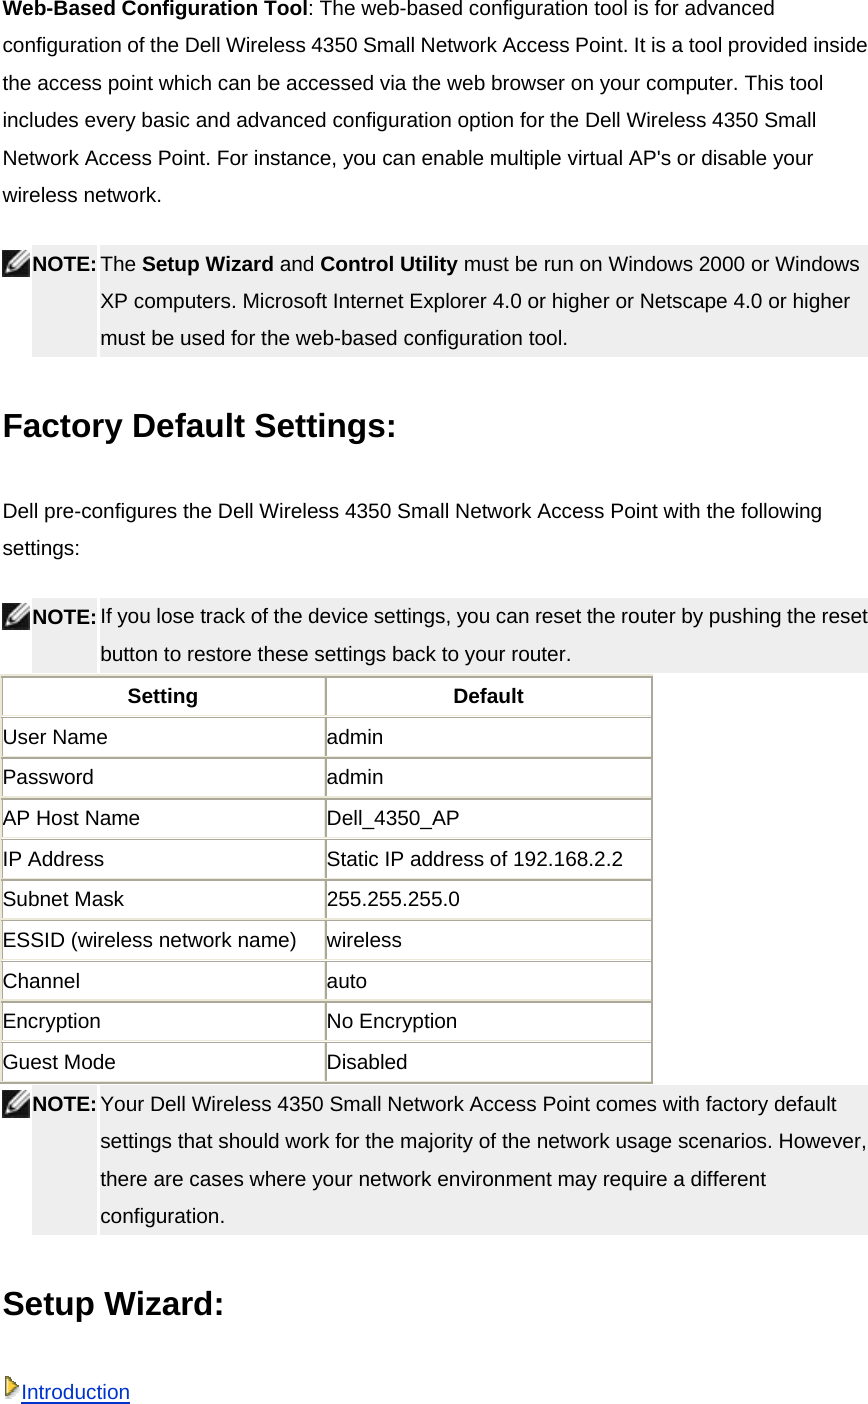 Web-Based Configuration Tool: The web-based configuration tool is for advanced configuration of the Dell Wireless 4350 Small Network Access Point. It is a tool provided inside the access point which can be accessed via the web browser on your computer. This tool includes every basic and advanced configuration option for the Dell Wireless 4350 Small Network Access Point. For instance, you can enable multiple virtual AP&apos;s or disable your wireless network.  NOTE: The Setup Wizard and Control Utility must be run on Windows 2000 or Windows XP computers. Microsoft Internet Explorer 4.0 or higher or Netscape 4.0 or higher must be used for the web-based configuration tool.   Factory Default Settings:   Dell pre-configures the Dell Wireless 4350 Small Network Access Point with the following settings:  NOTE: If you lose track of the device settings, you can reset the router by pushing the reset button to restore these settings back to your router.  Setting Default User Name  admin Password admin AP Host Name  Dell_4350_AP IP Address  Static IP address of 192.168.2.2 Subnet Mask  255.255.255.0 ESSID (wireless network name)  wireless Channel auto Encryption No Encryption Guest Mode  Disabled  NOTE: Your Dell Wireless 4350 Small Network Access Point comes with factory default settings that should work for the majority of the network usage scenarios. However, there are cases where your network environment may require a different configuration.  Setup Wizard: Introduction